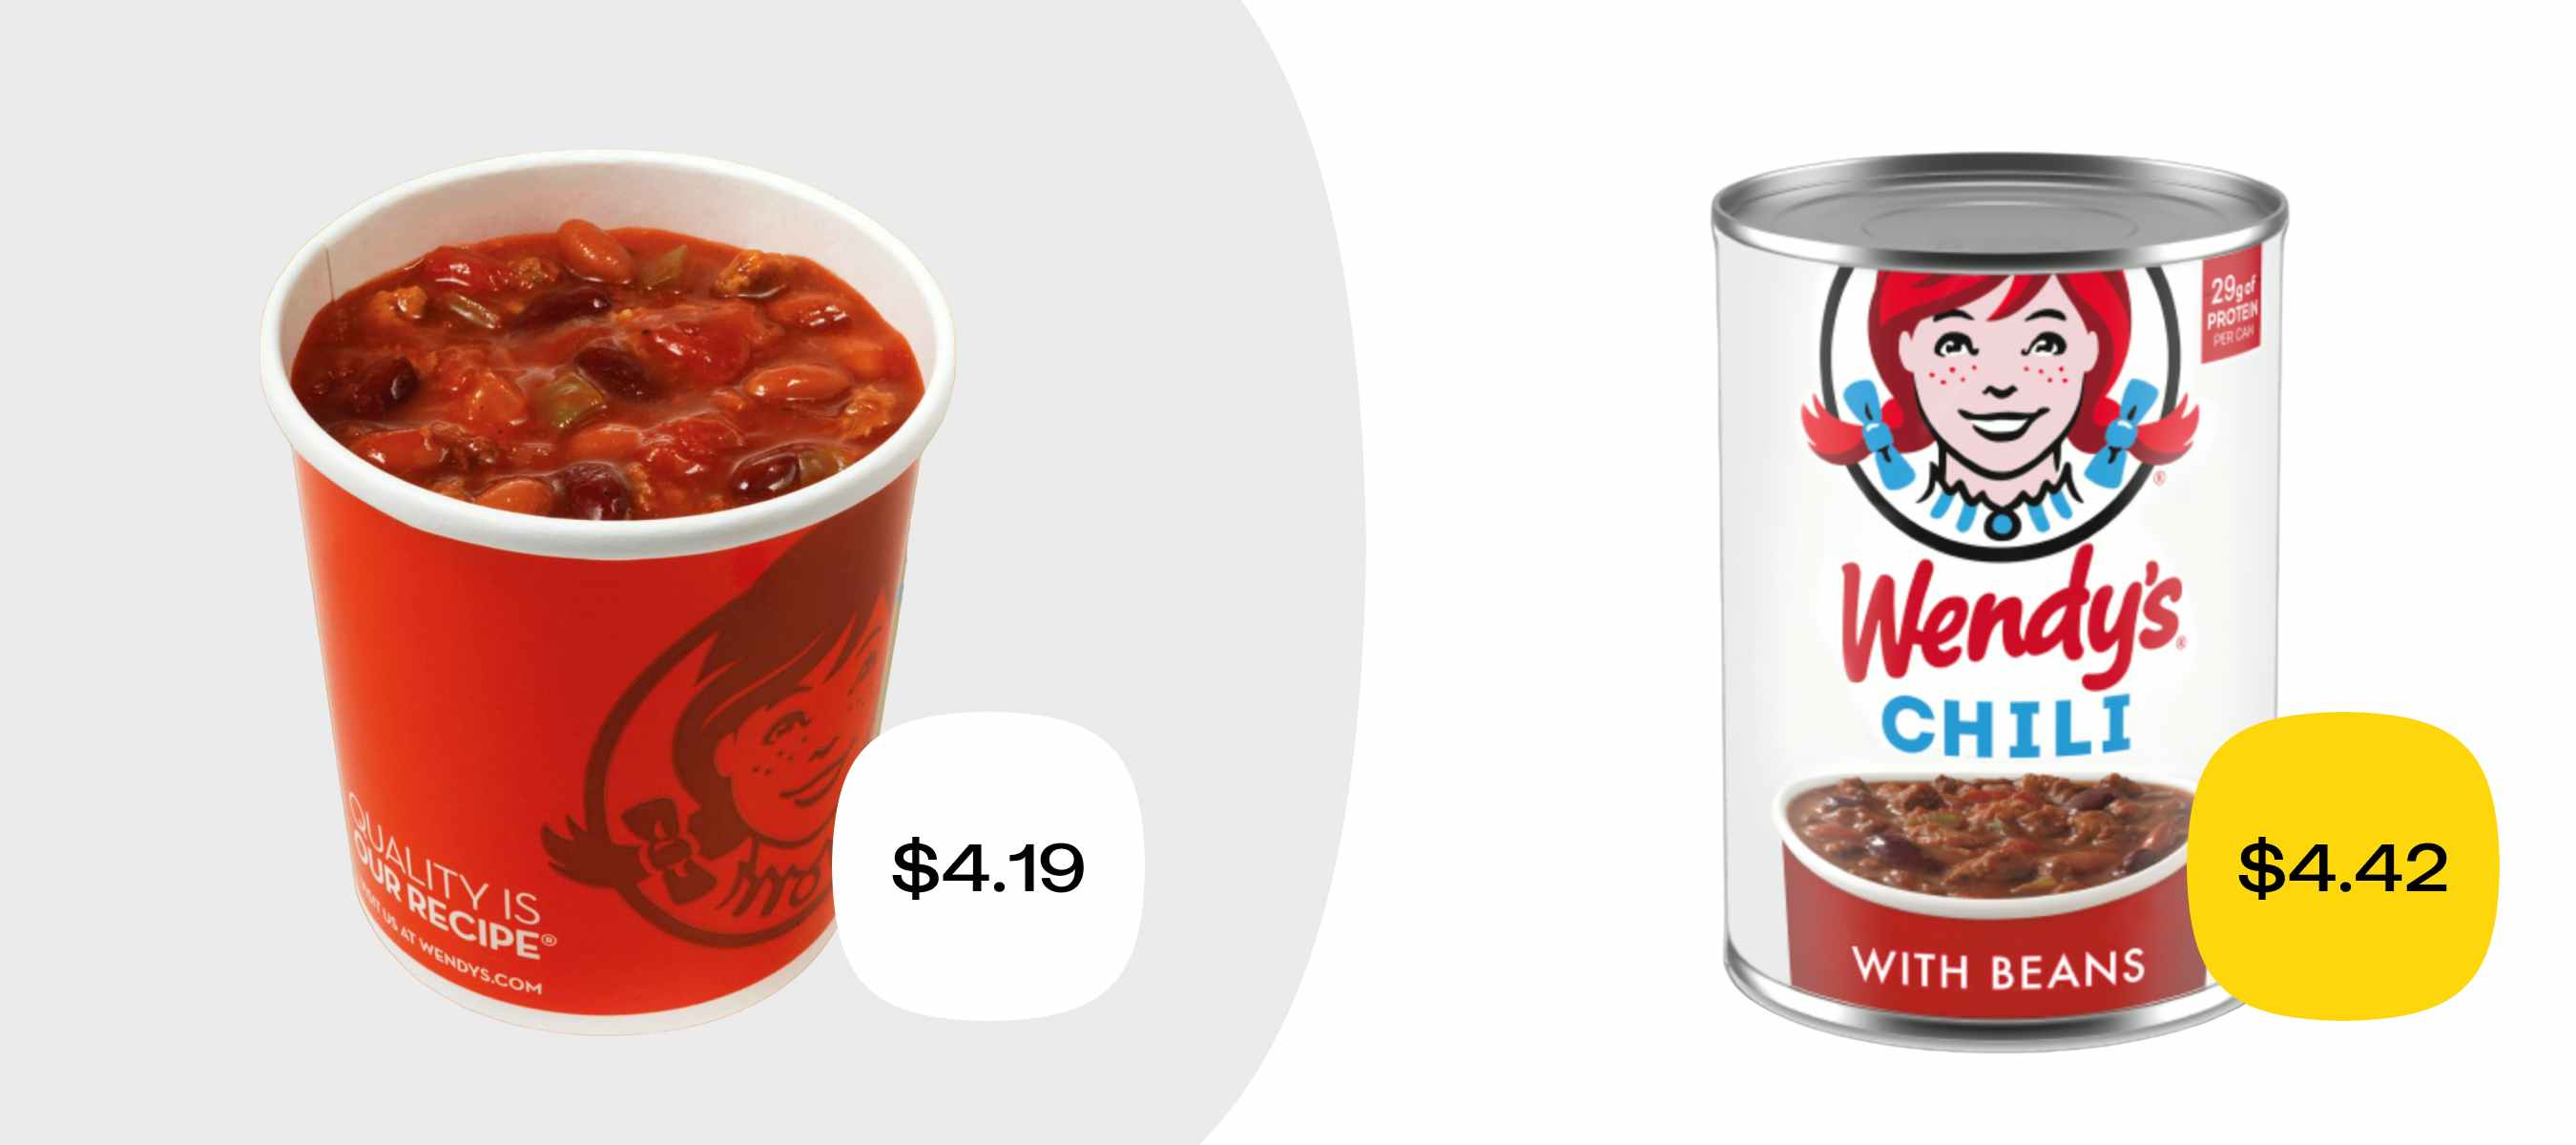 wendys chili for $4.19 versus canned for $4.42